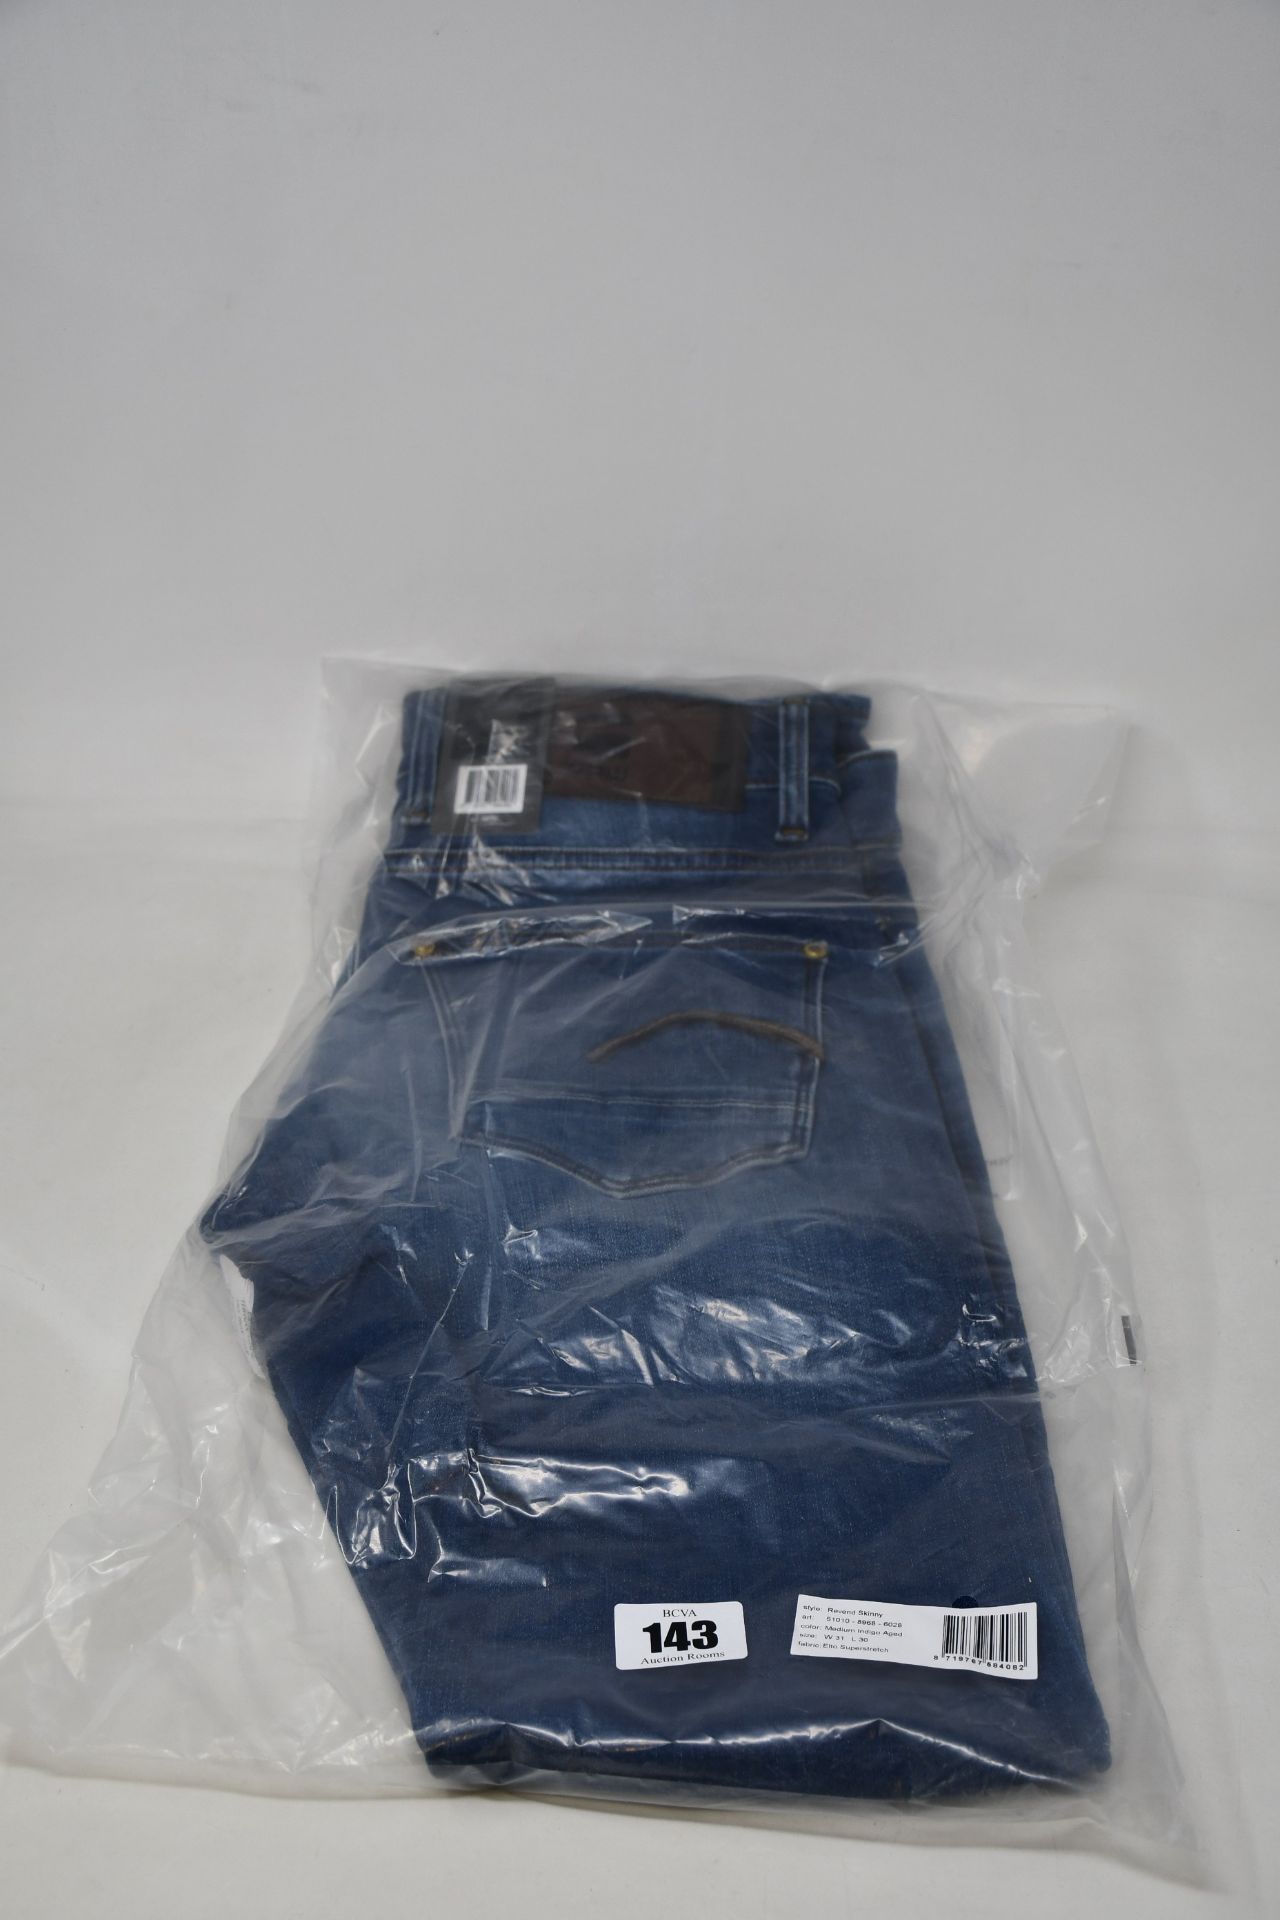 Four pairs of as new G-Star Raw jeans (All W31/L30).